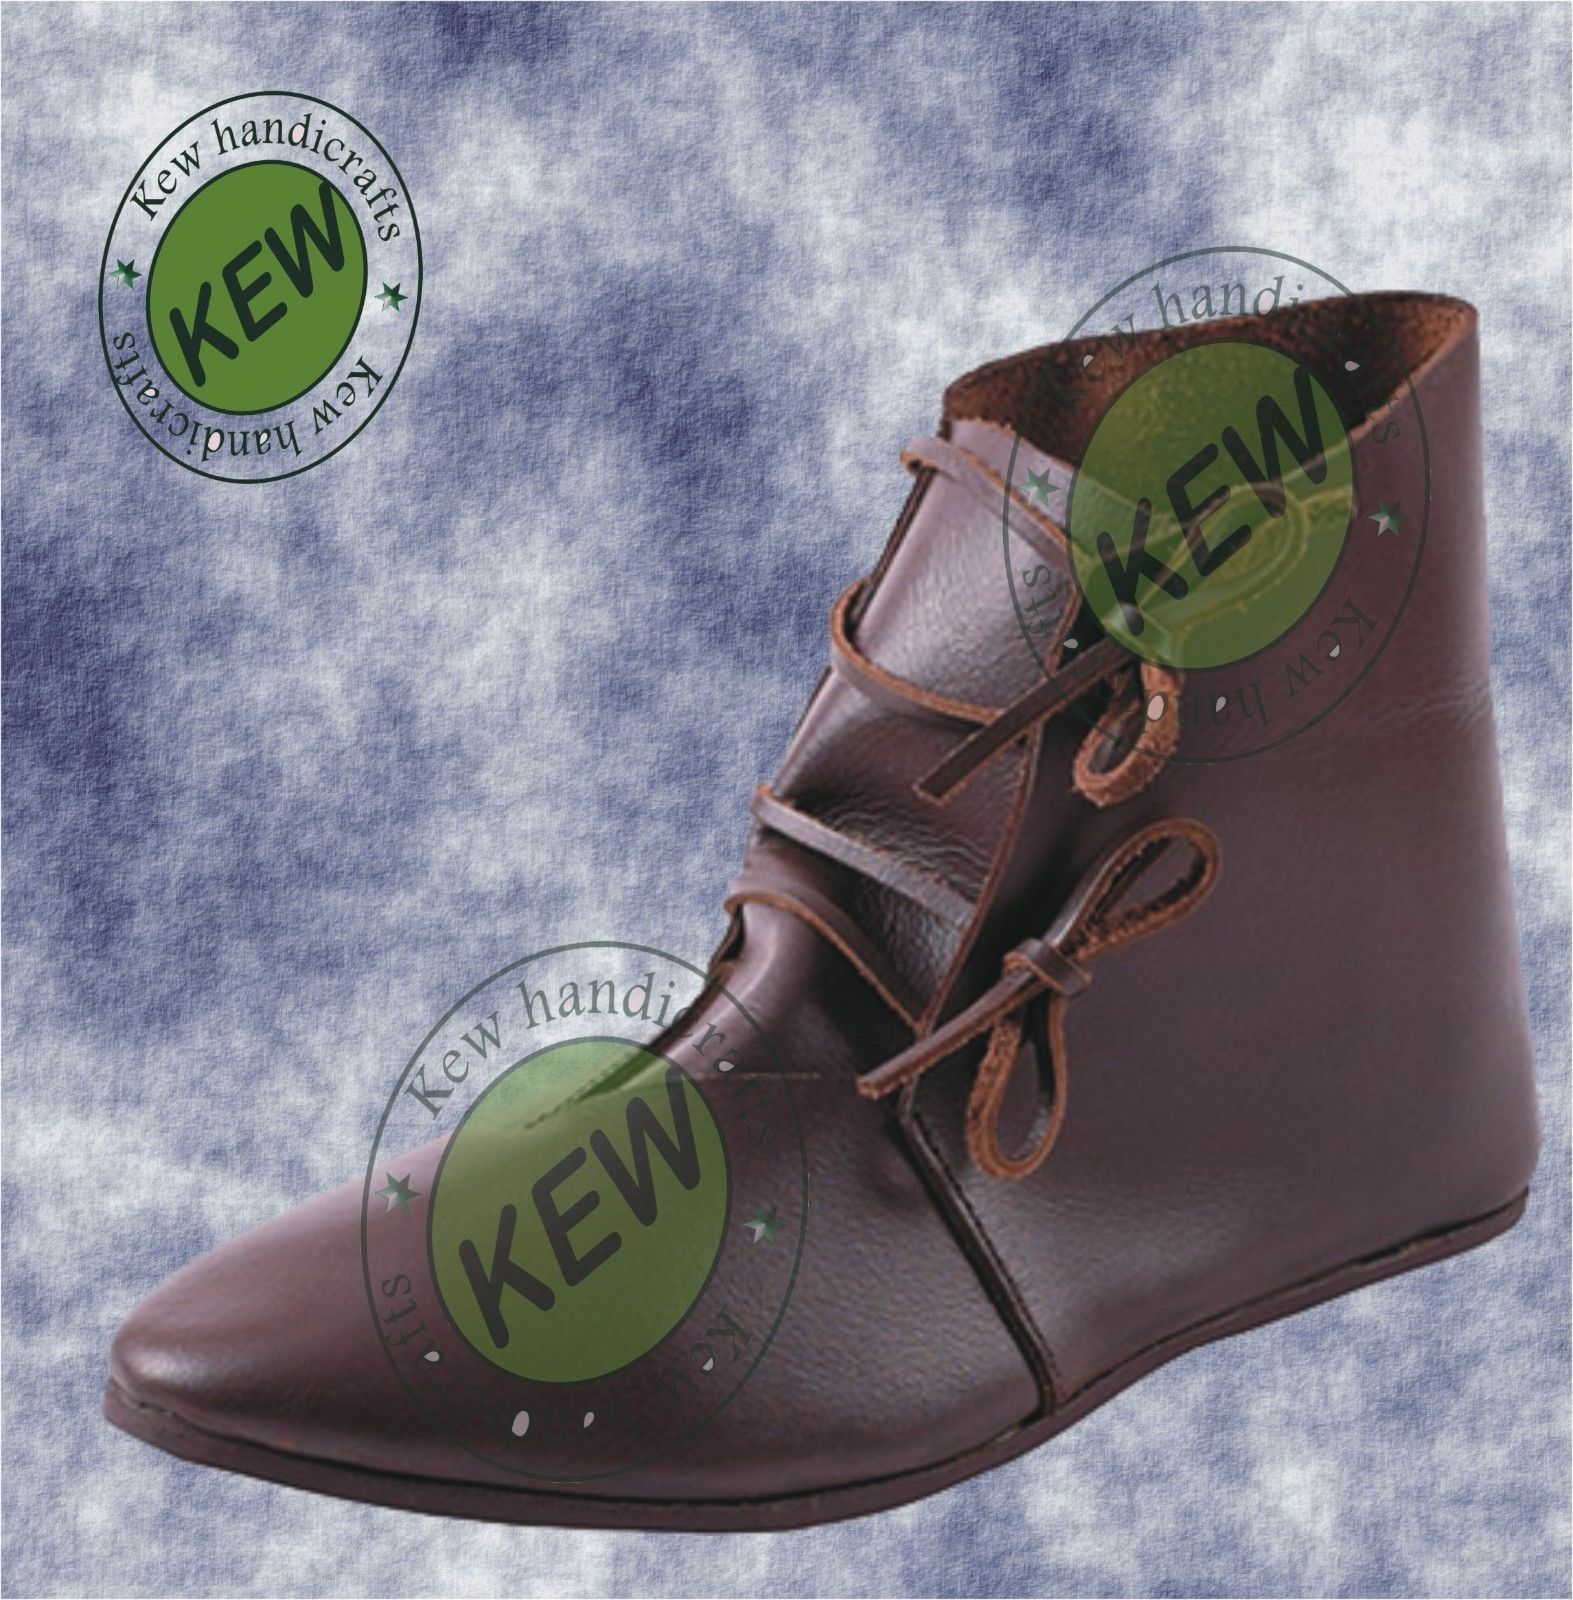 MEDIEVAL-RENAISSANCE-VIKING-MUSKETEER-PIRATE-Mens-Brown-Leather-BOOTS-SHOES-5-5